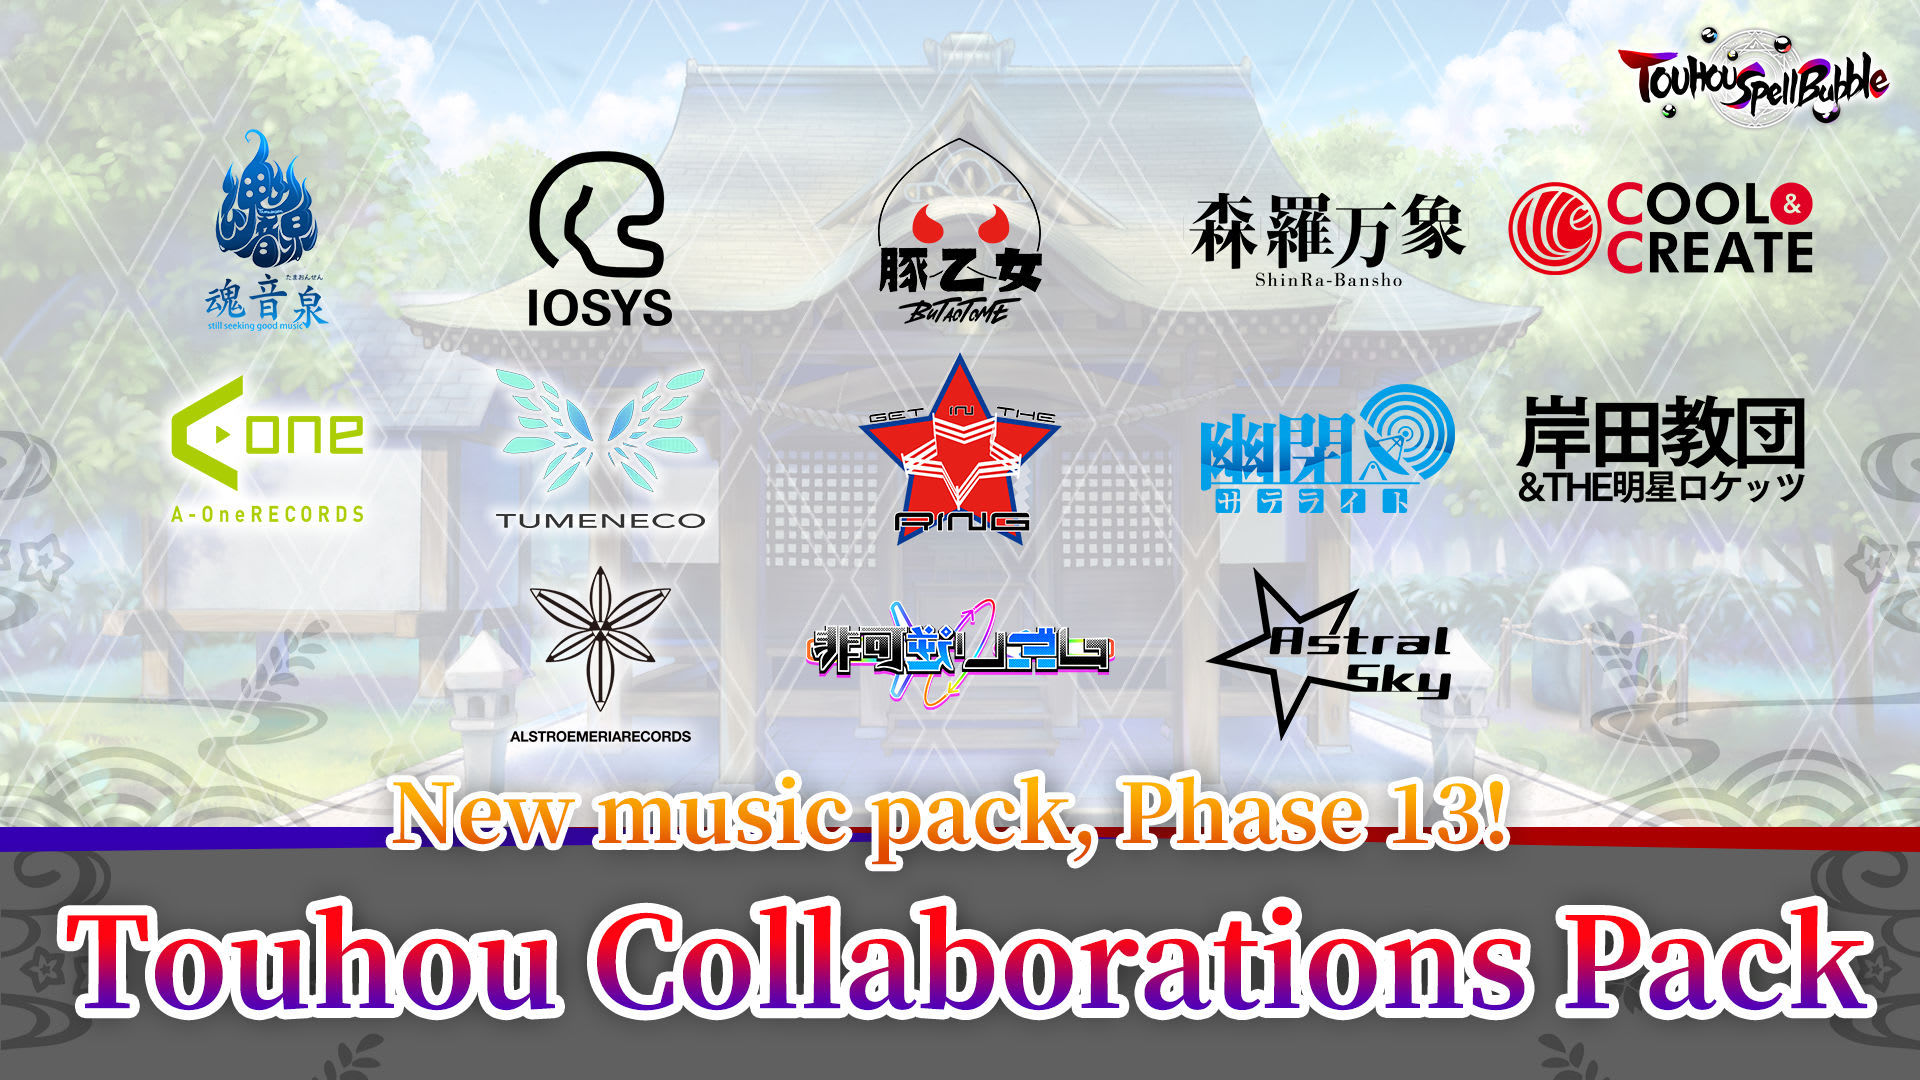 Touhou Collaborations Pack